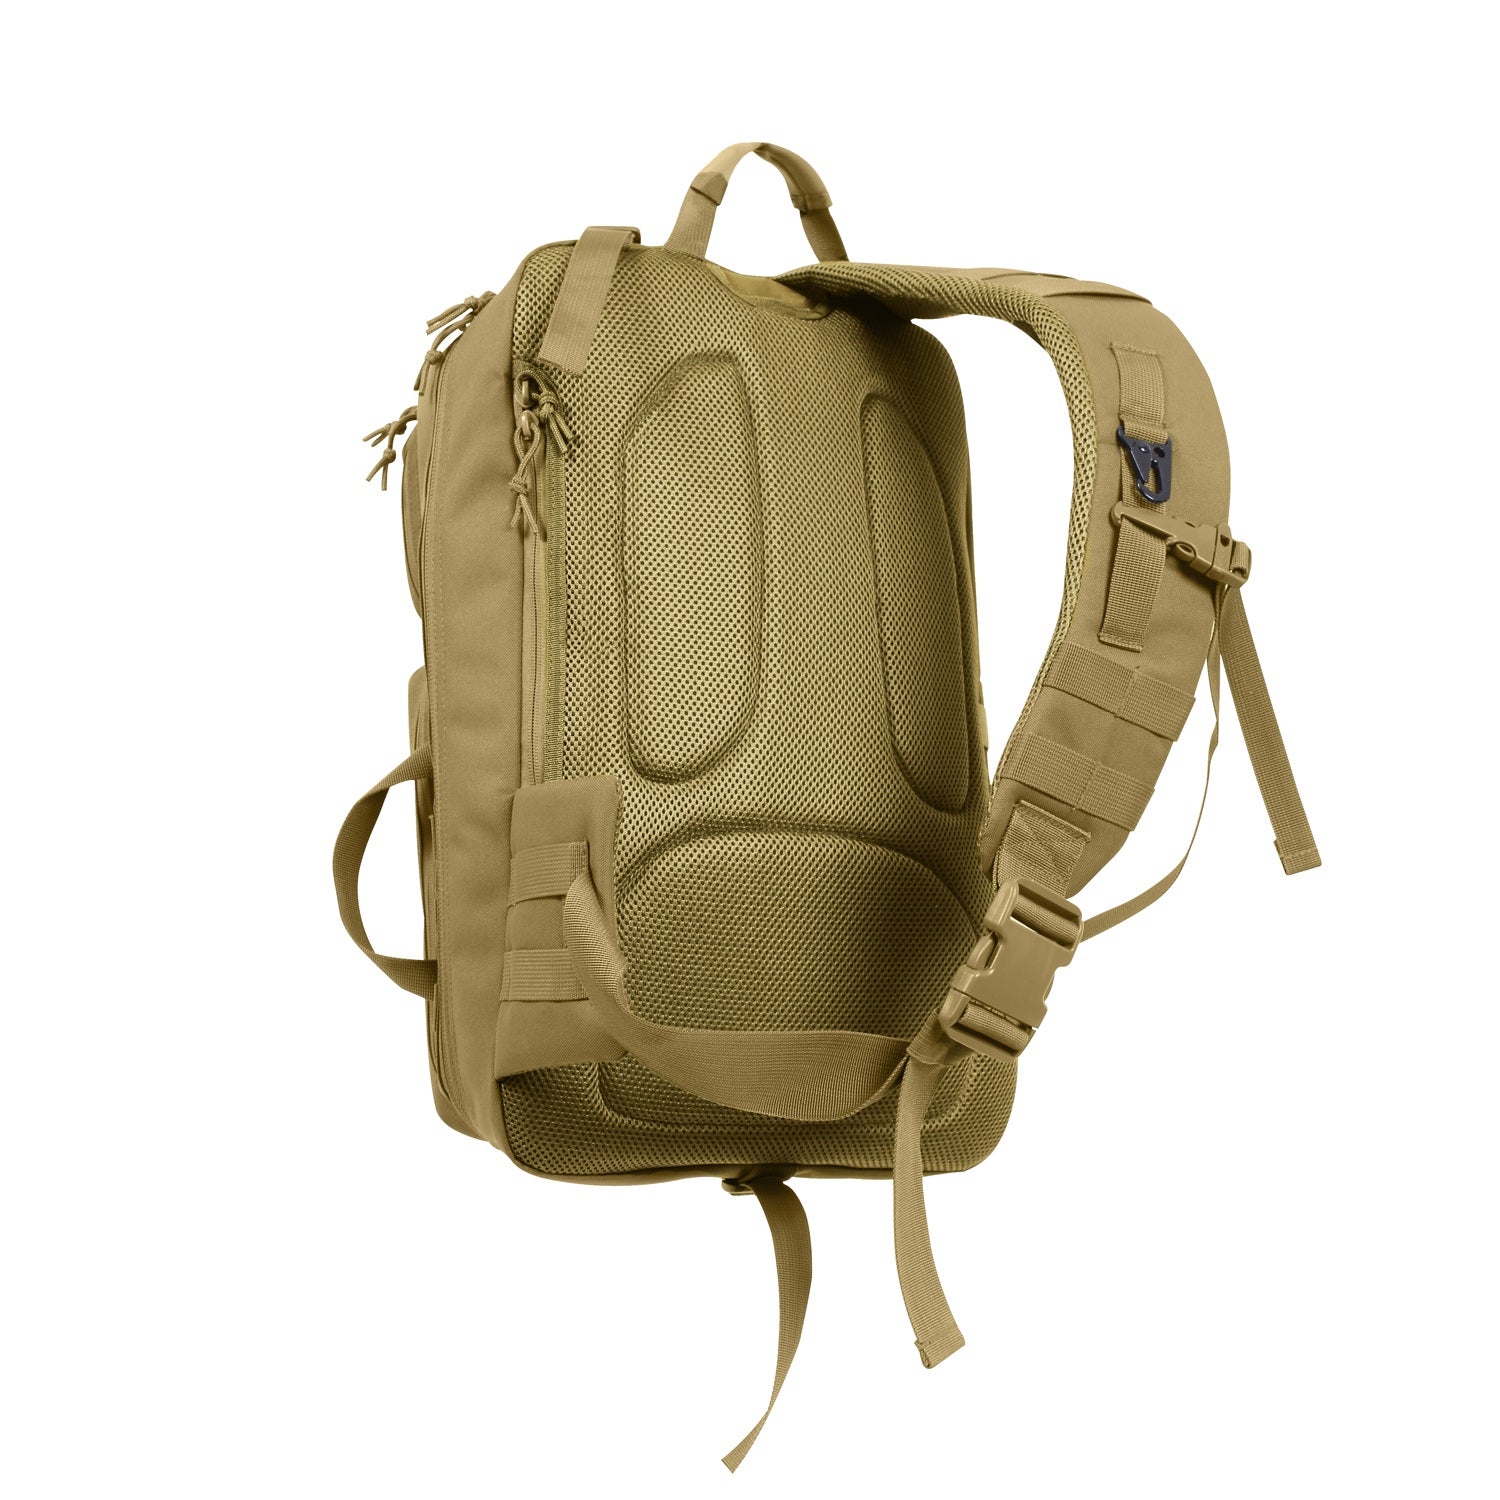 Rothco Tactisling Transport Pack Coyote Brown